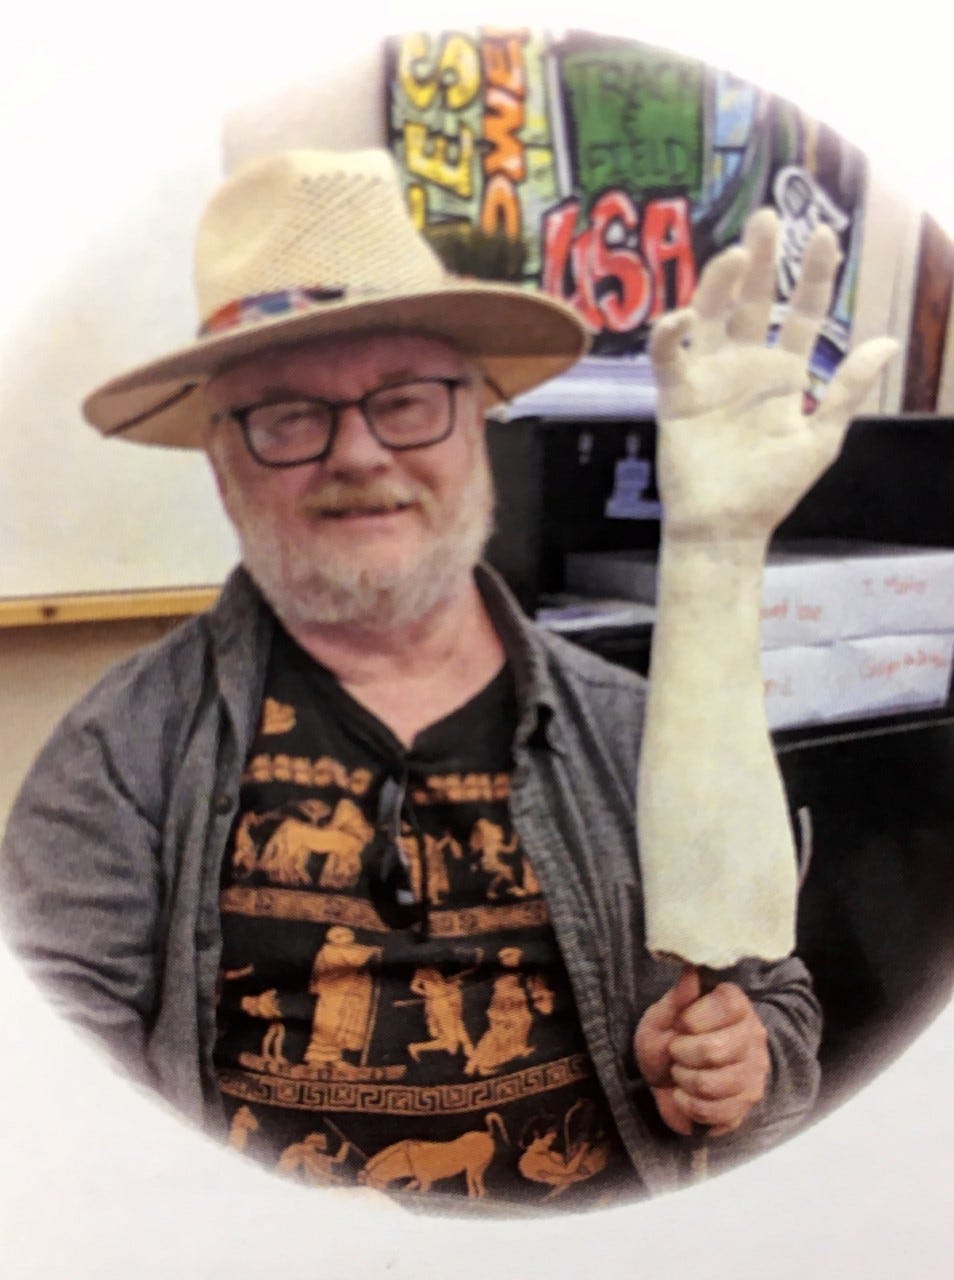 Dan Spector holds a cast of a human hand and arm. This photo was taken during one of his first visits to the Memphis Challenge office. He later taught high school students how to make plaster casts of their own hands and use them to tell a story.